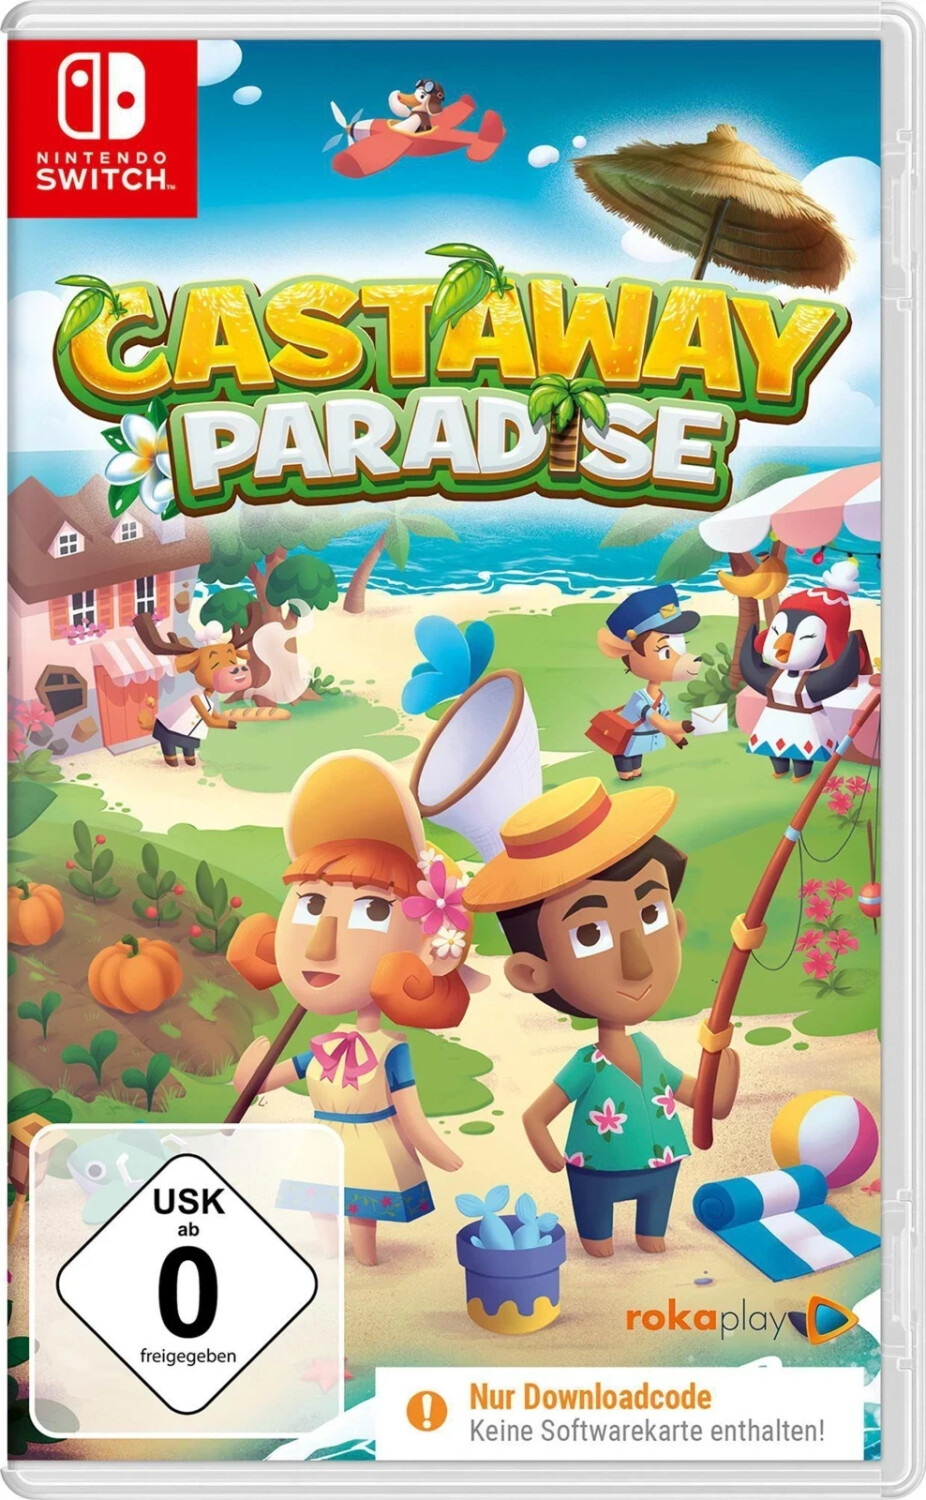 finding paradise switch reddit download